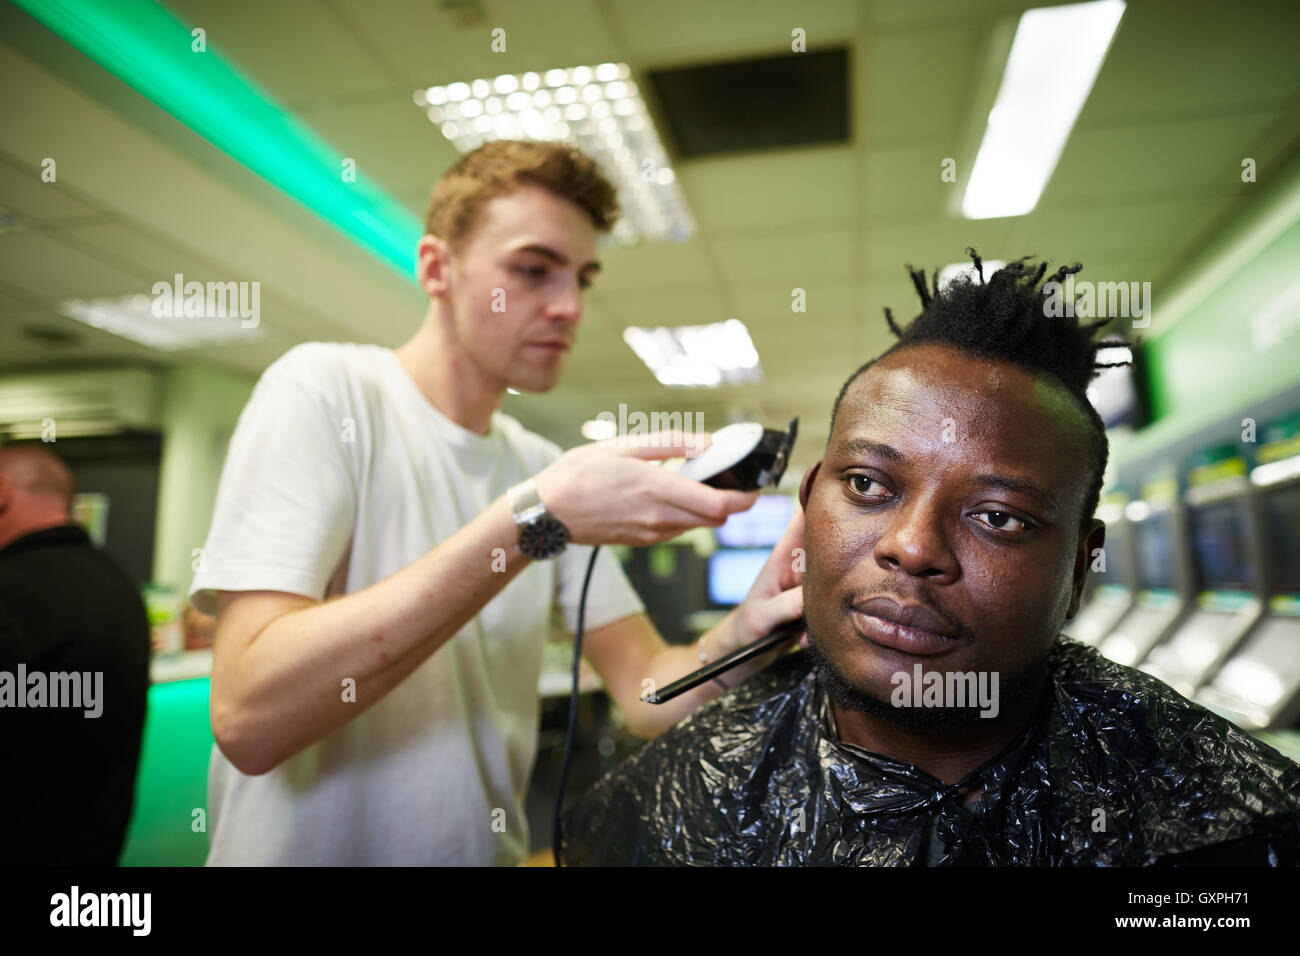 Black male has haircut shaved head at PaddyPower manchester as a PR marketing stunt Stock Photo